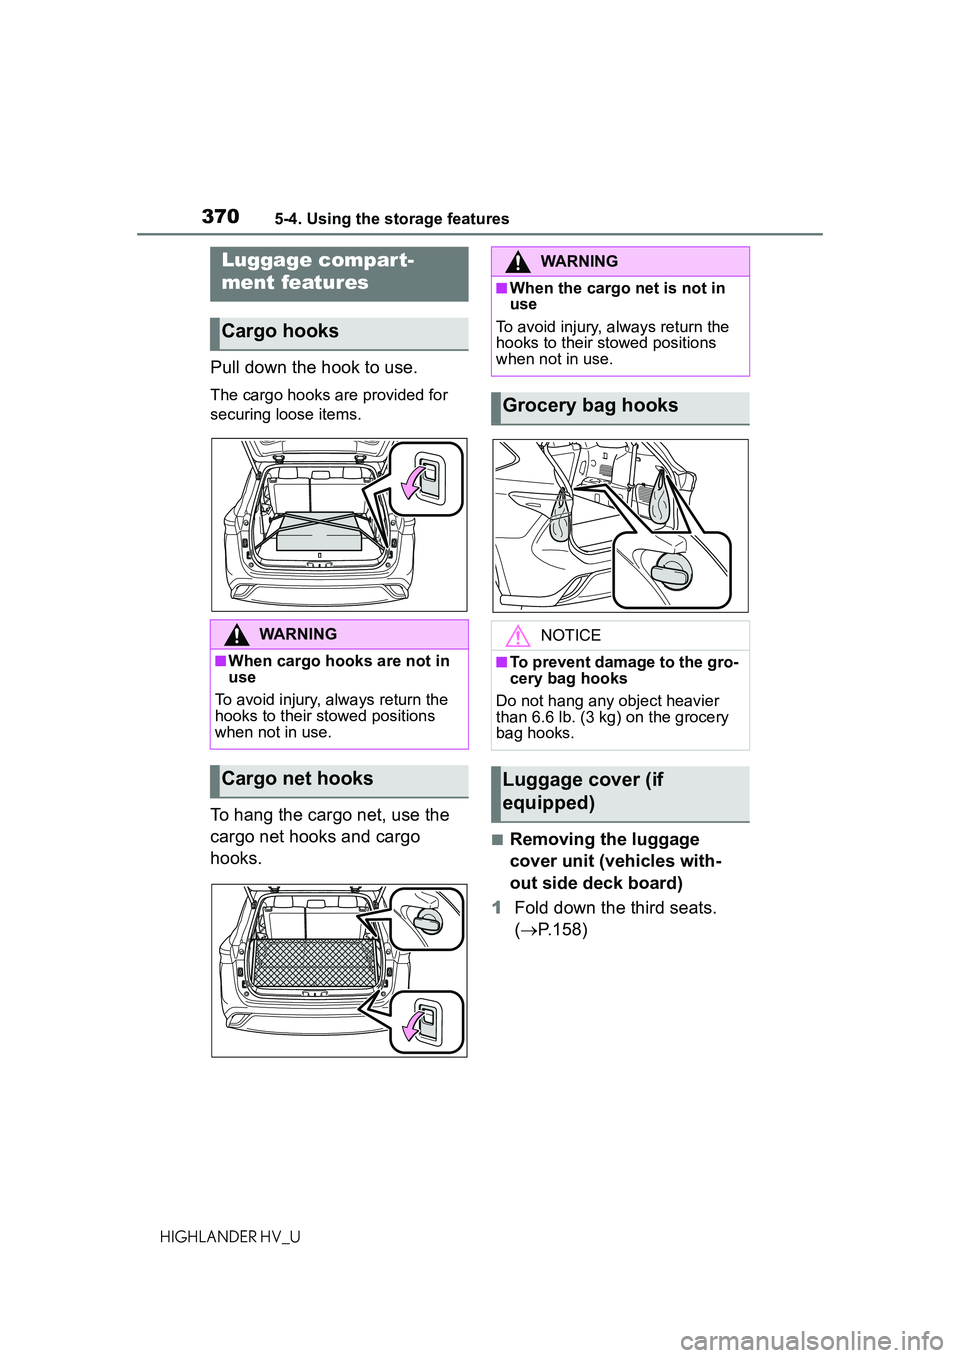 TOYOTA HIGHLANDER HYBRID 2021  Owners Manual (in English) 3705-4. Using the storage features
HIGHLANDER HV_U
Pull down the hook to use.
The cargo hooks are provided for 
securing loose items.
To hang the cargo net, use the 
cargo net hooks and cargo 
hooks.
